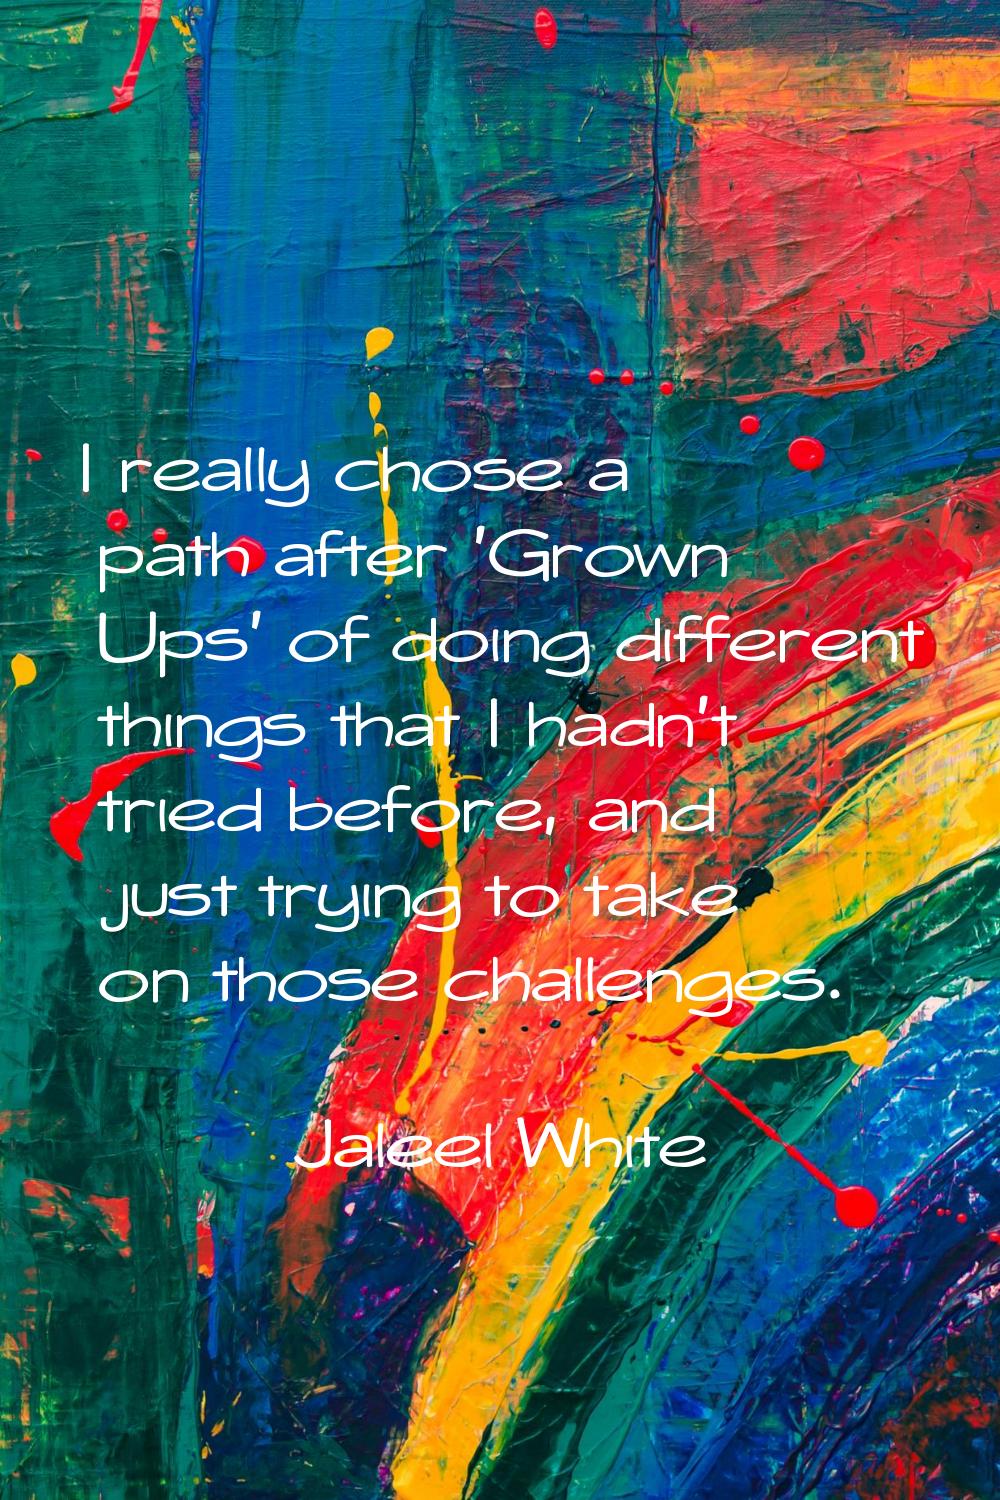 I really chose a path after 'Grown Ups' of doing different things that I hadn't tried before, and j